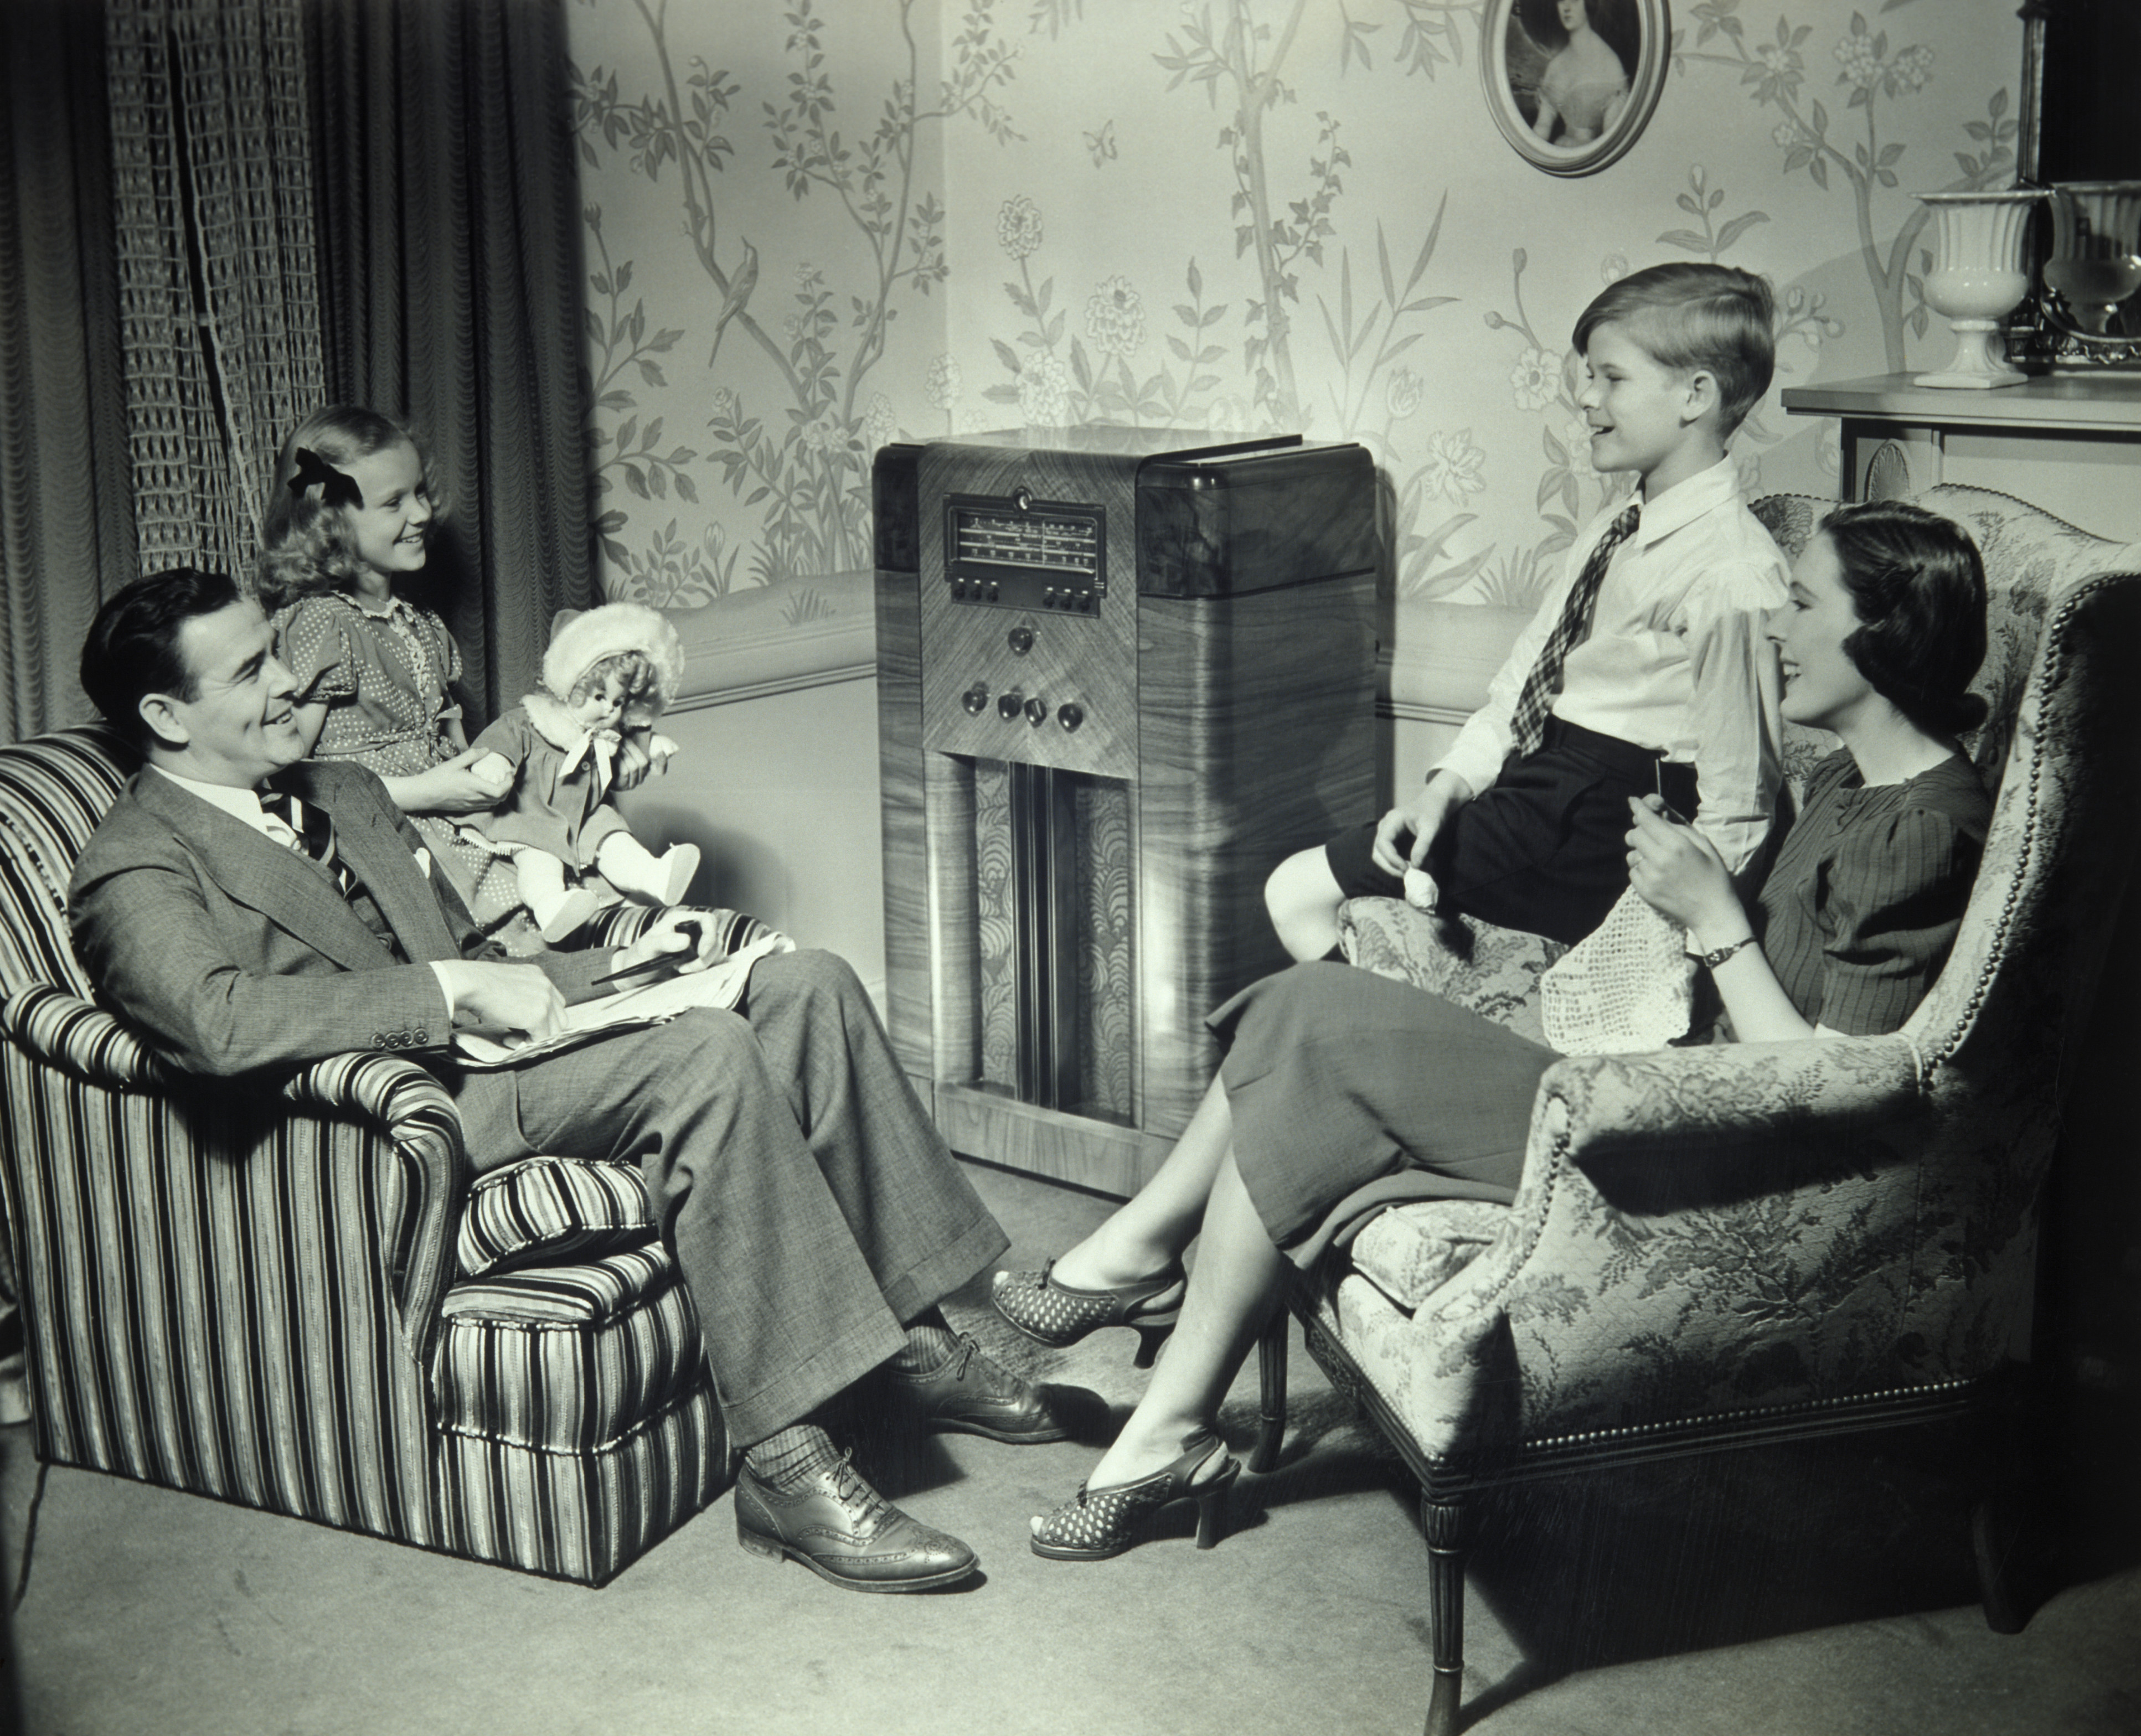 UNITED STATES - CIRCA 1950s: Family listening to radio (George Marks/Getty Images) 